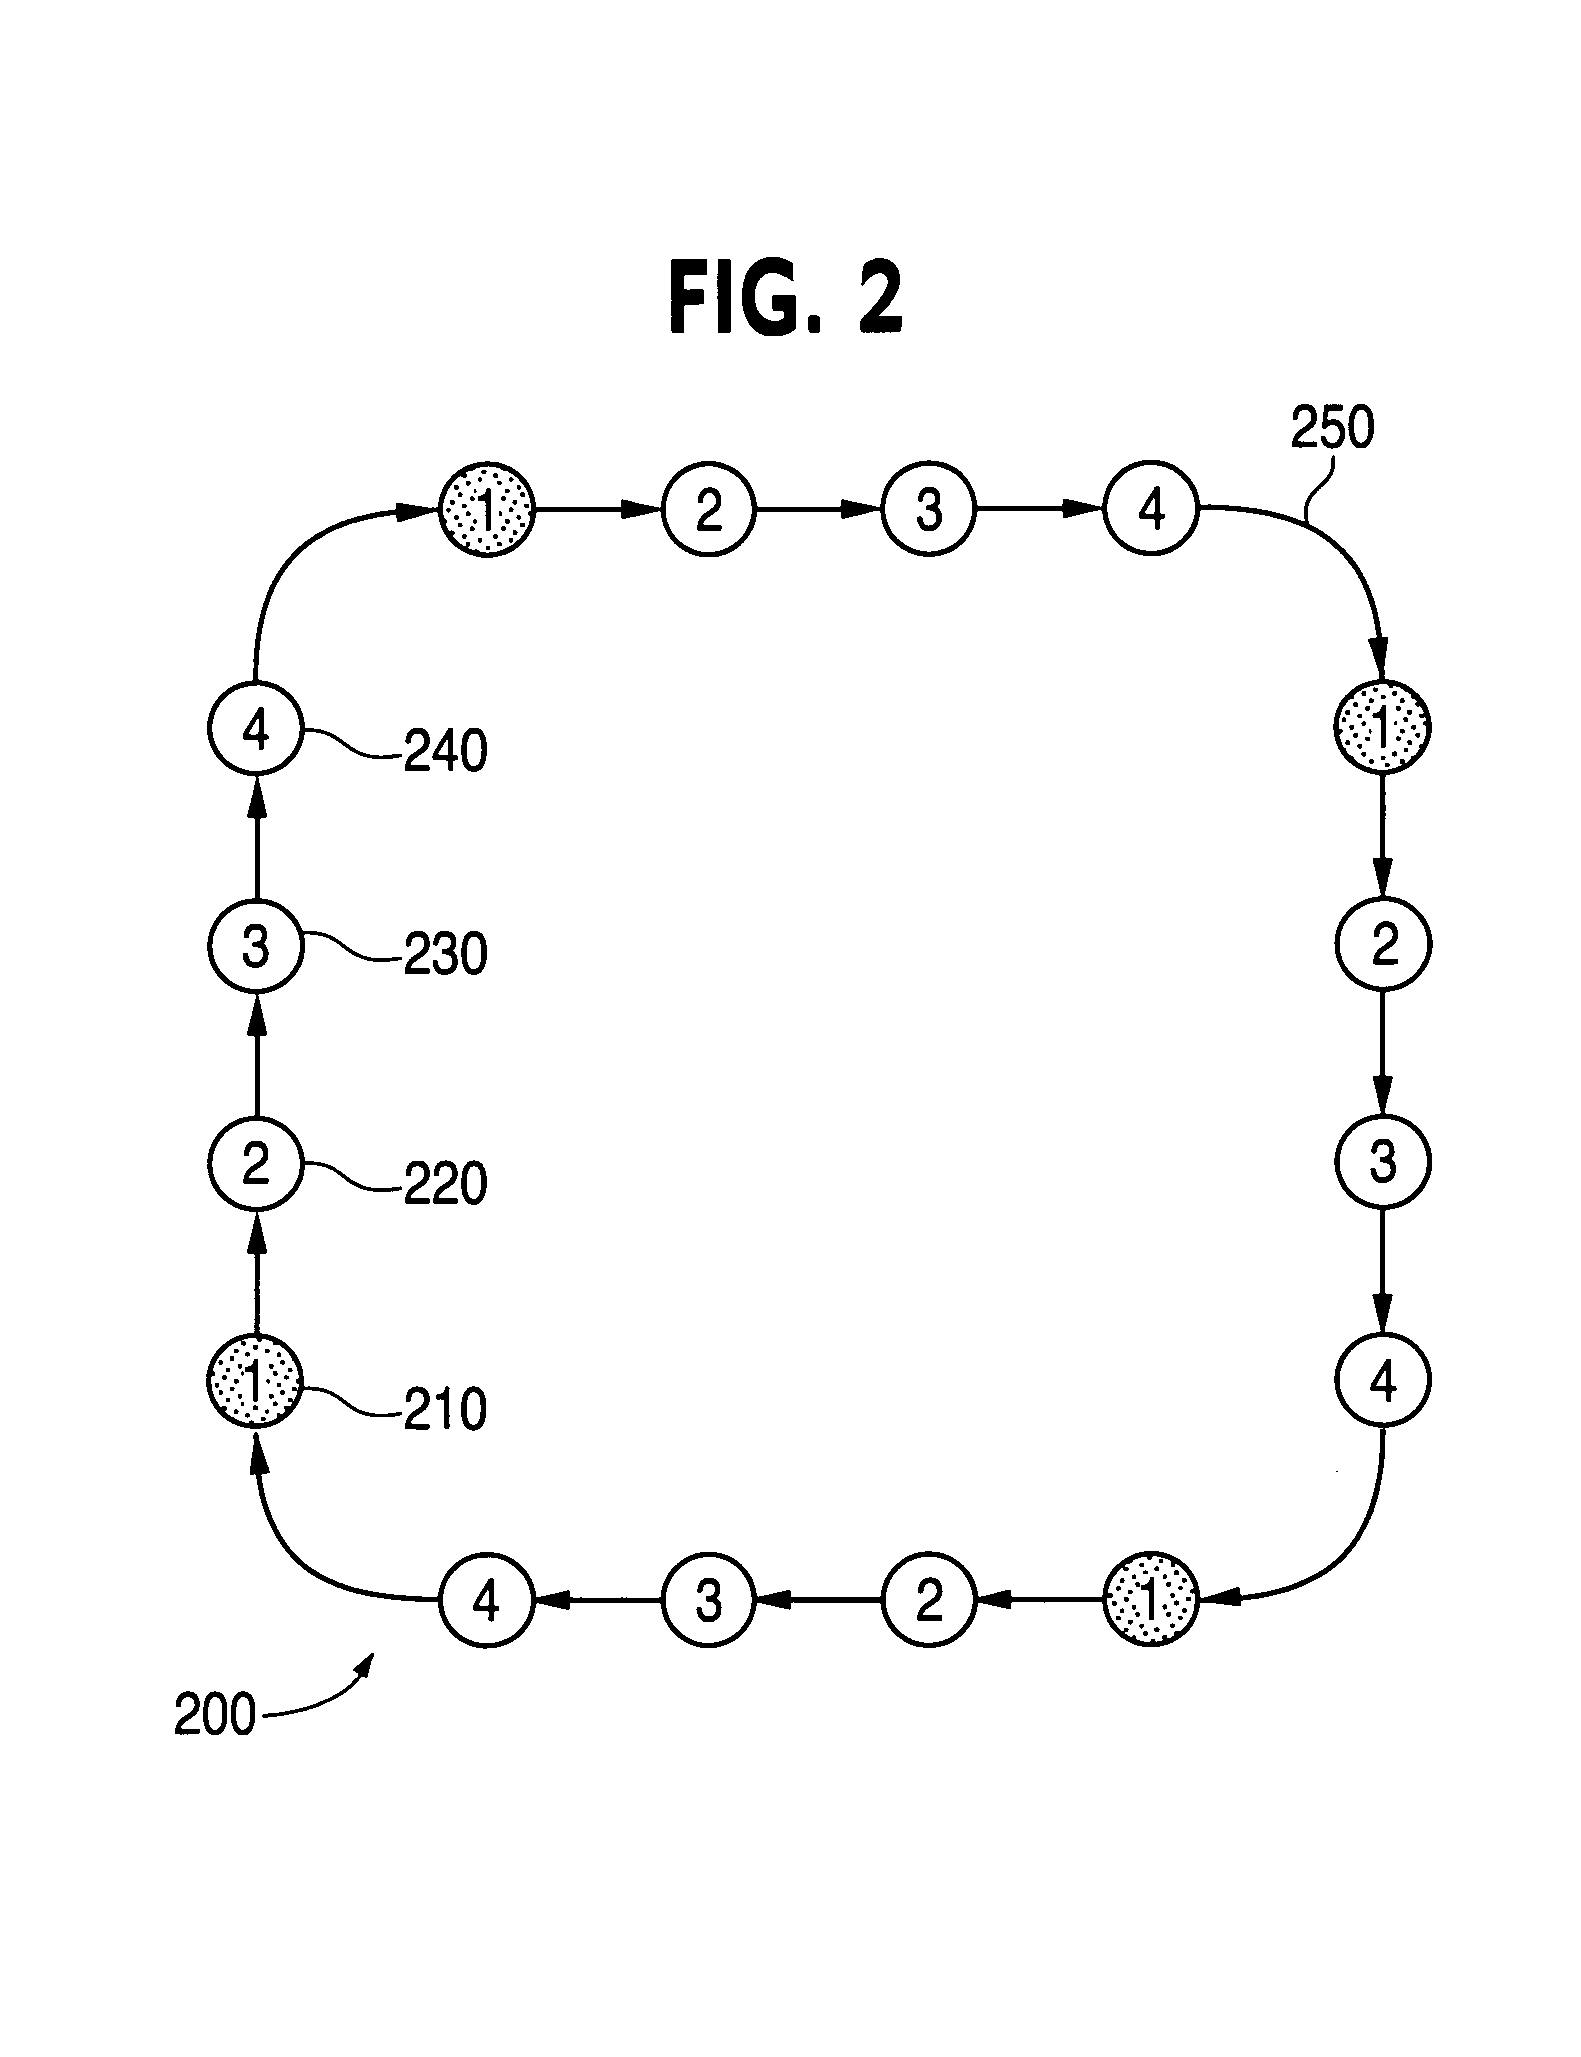 Fire alarm system with method of building occupant evacuation